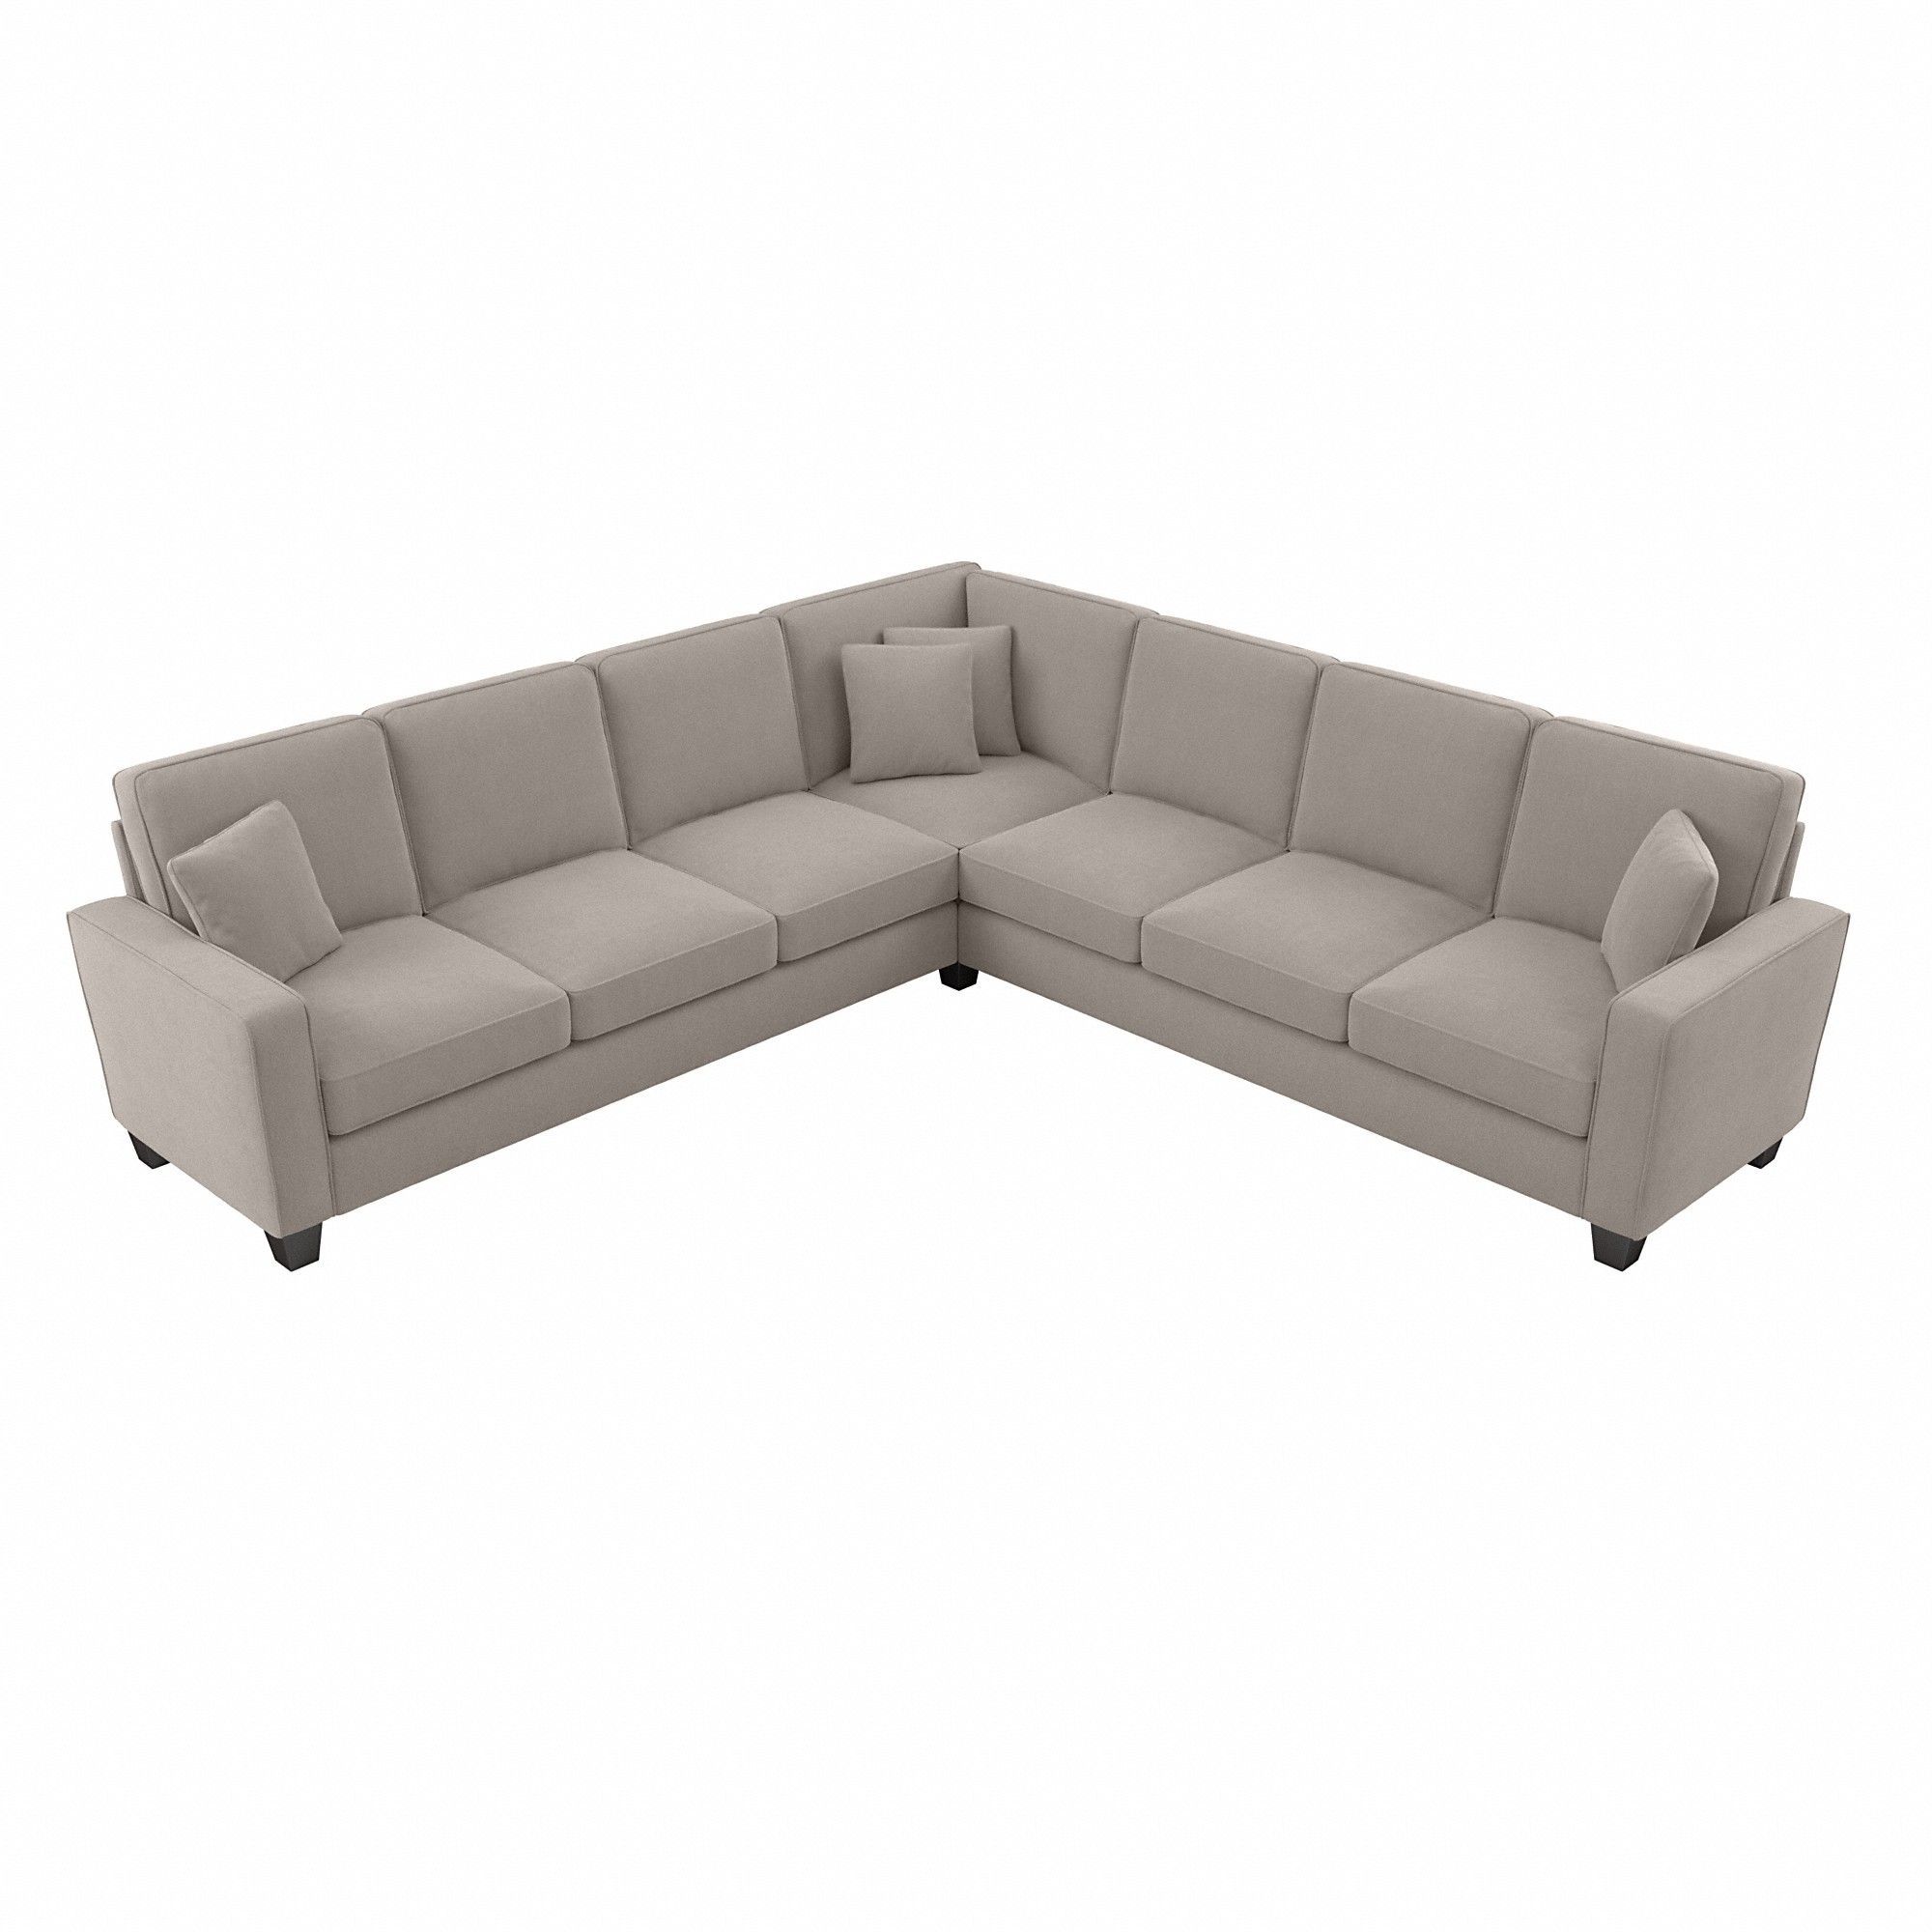 Furniture Stockton 110w L Shaped Sectional Couch In Beige Herringbone Intended For Beige L Shaped Sectional Sofas (View 7 of 20)